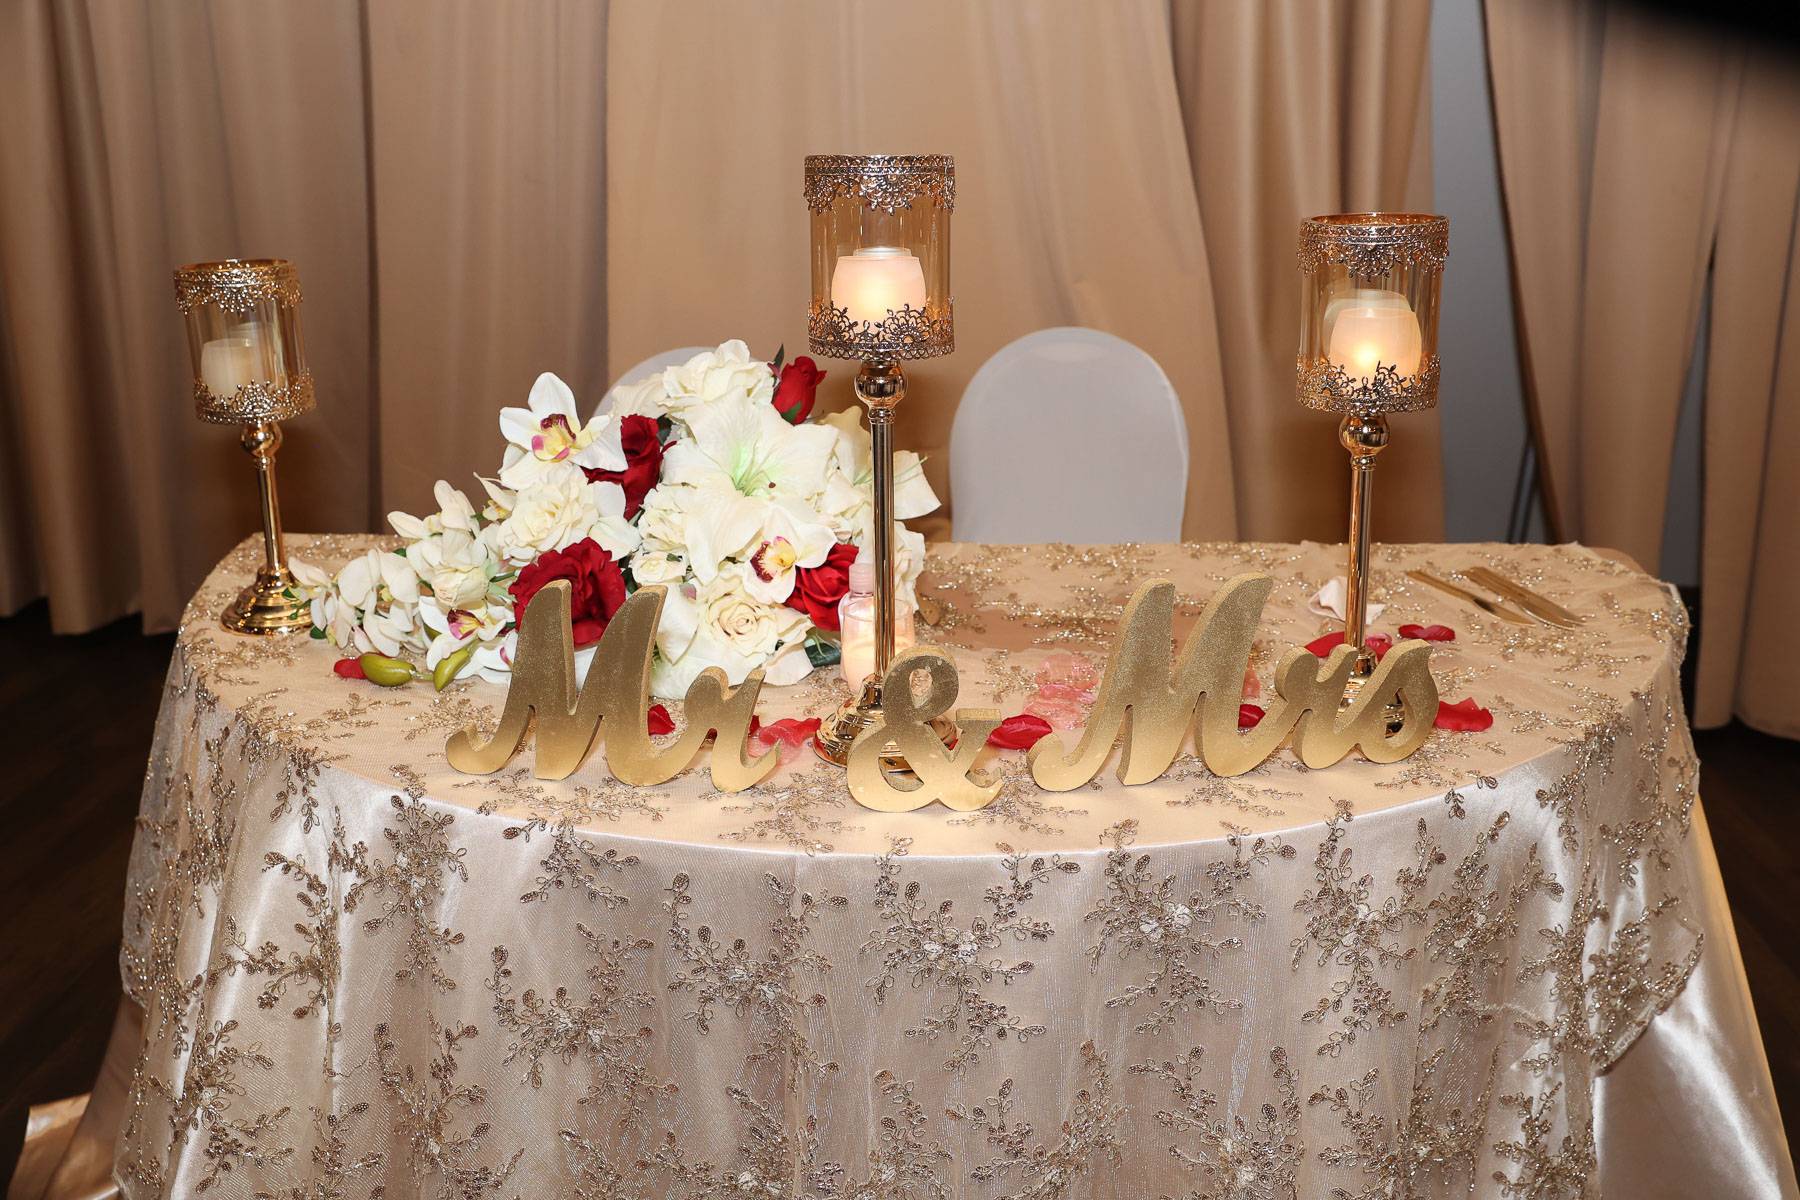 The table of the newlyweds